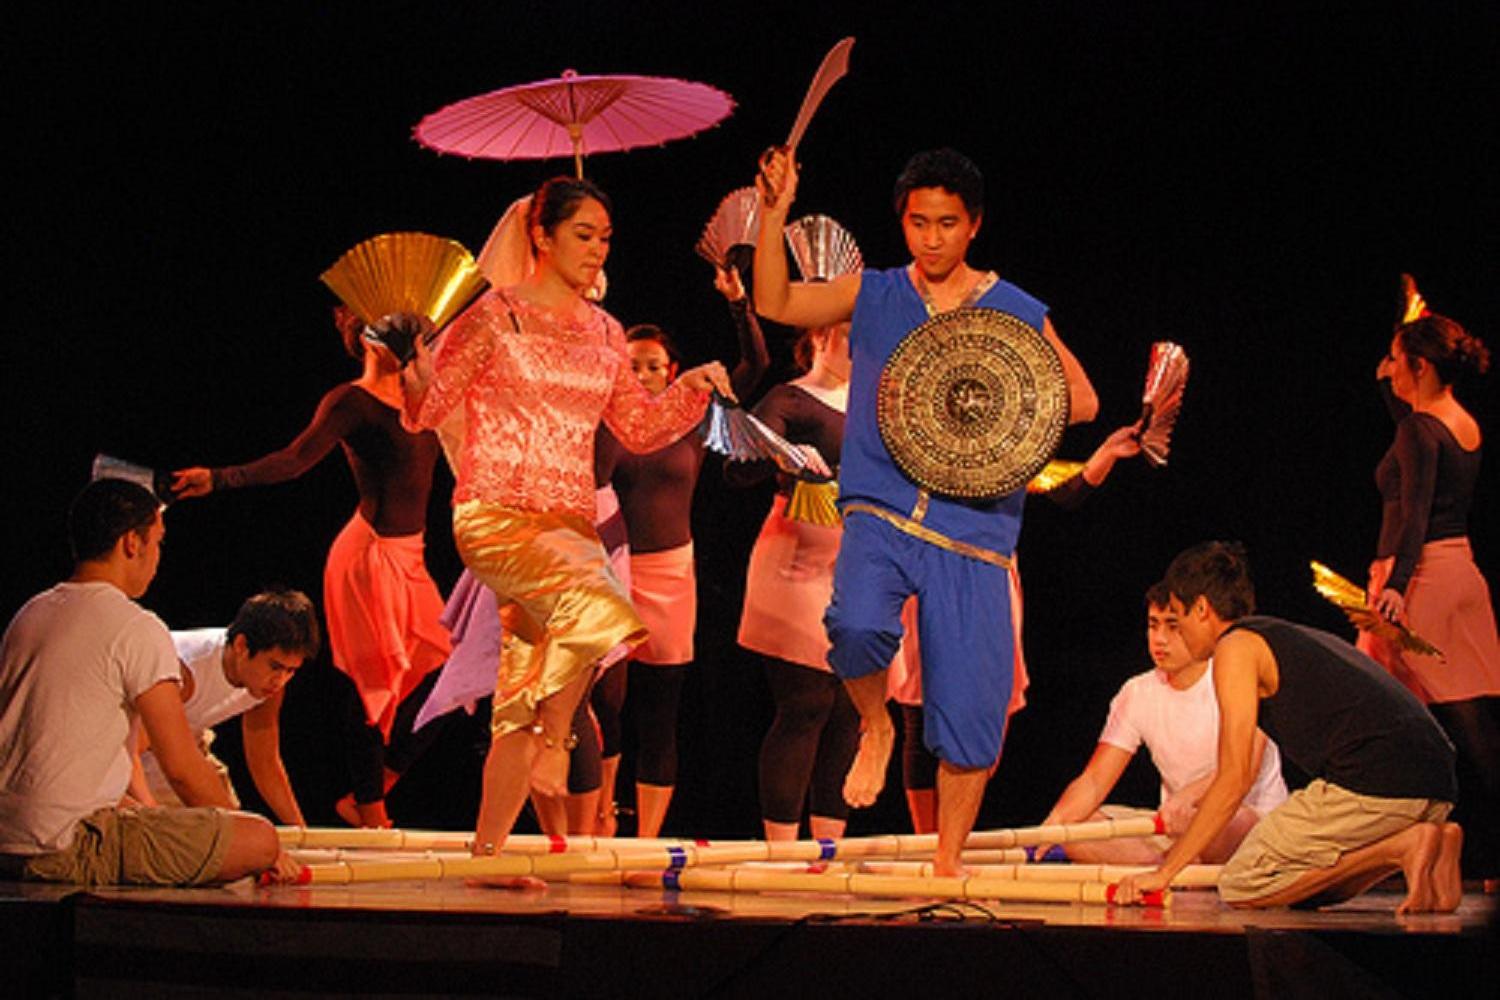 essay about the richness or beauty of philippine dances